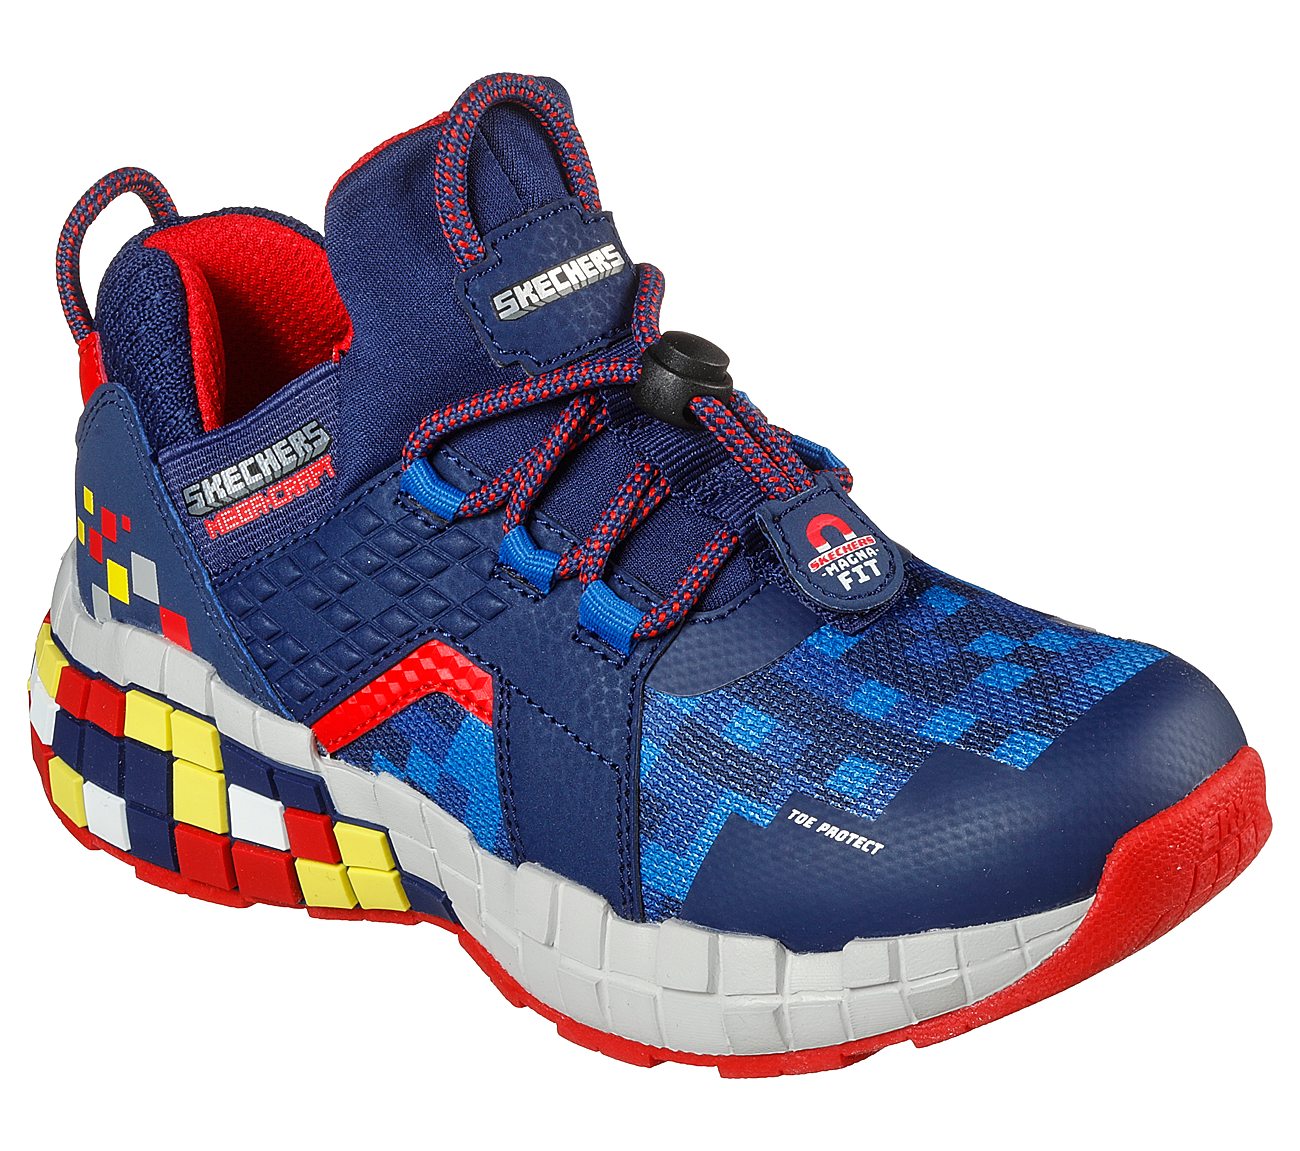 MEGA-CRAFT - CUBOZONE, NAVY/RED Footwear Right View